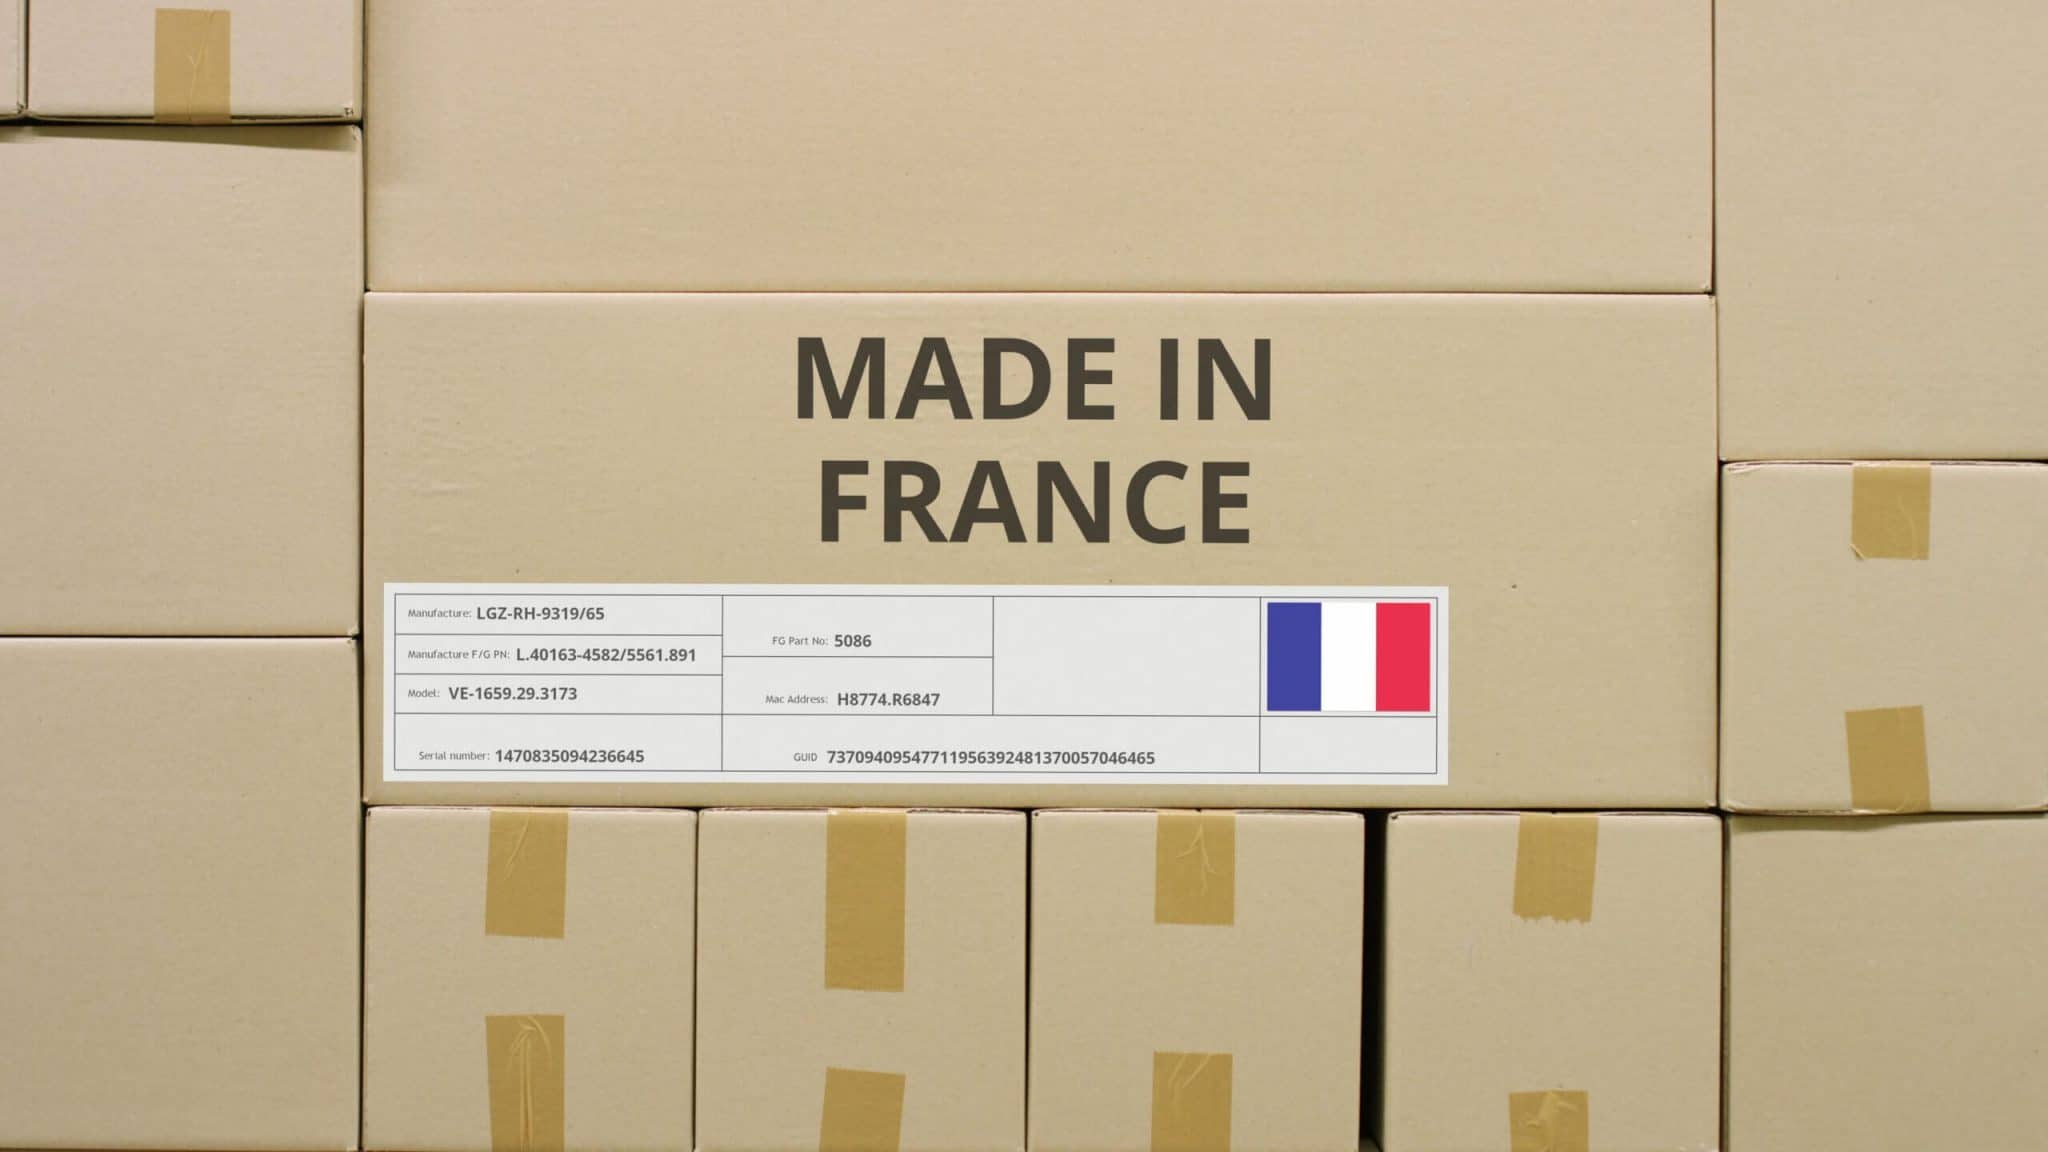 MADE IN FRANCE text and flag label on the carton in a storage